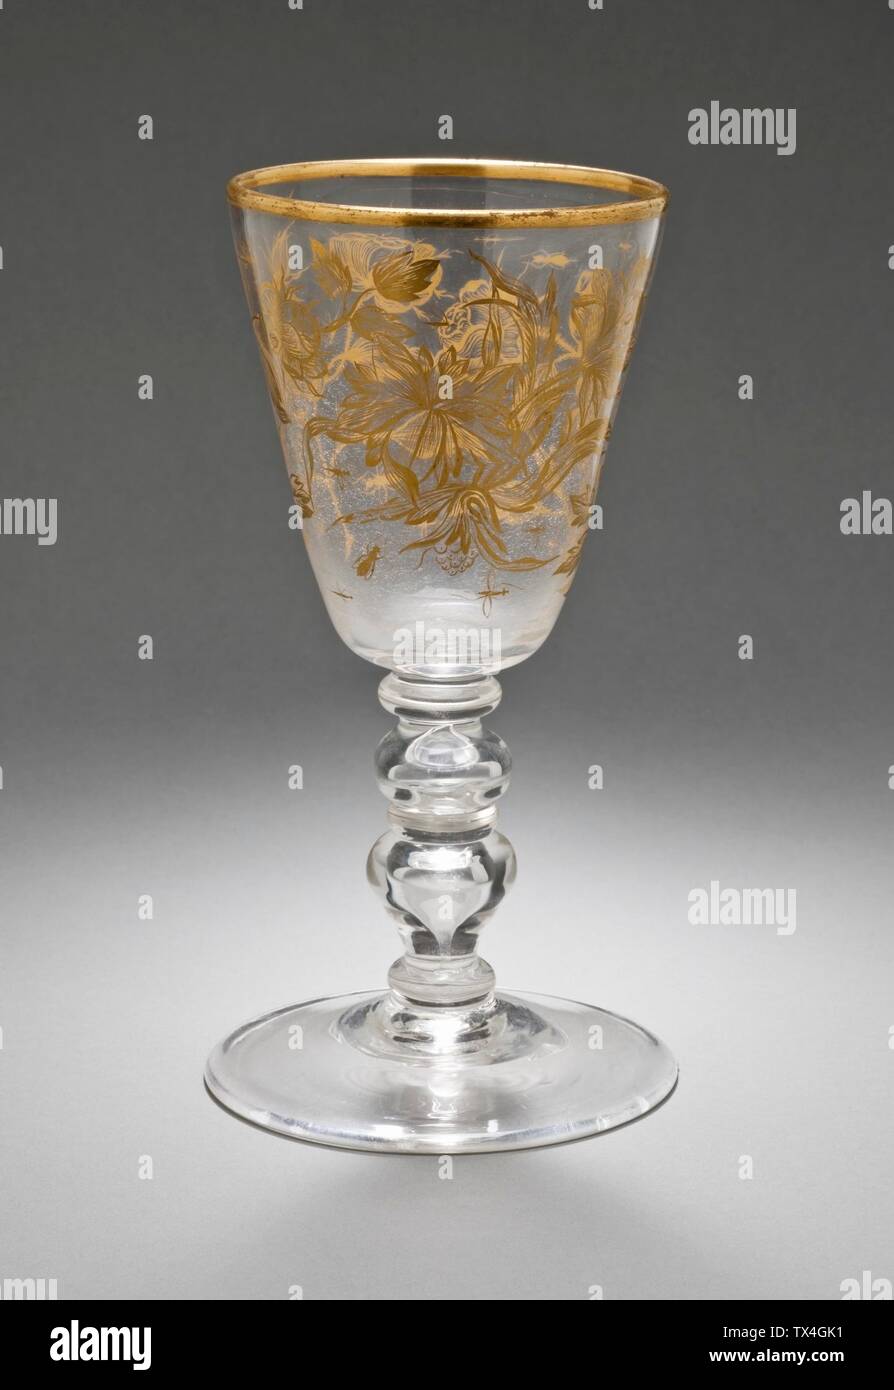 Goblet with Flowers and Insects;  Central Germany, mid-18th century Furnishings; Serviceware Glass, gilt Gift of Varya and Hans Cohn (M.82.124.22) Decorative Arts and Design; Mid-18th century; Stock Photo